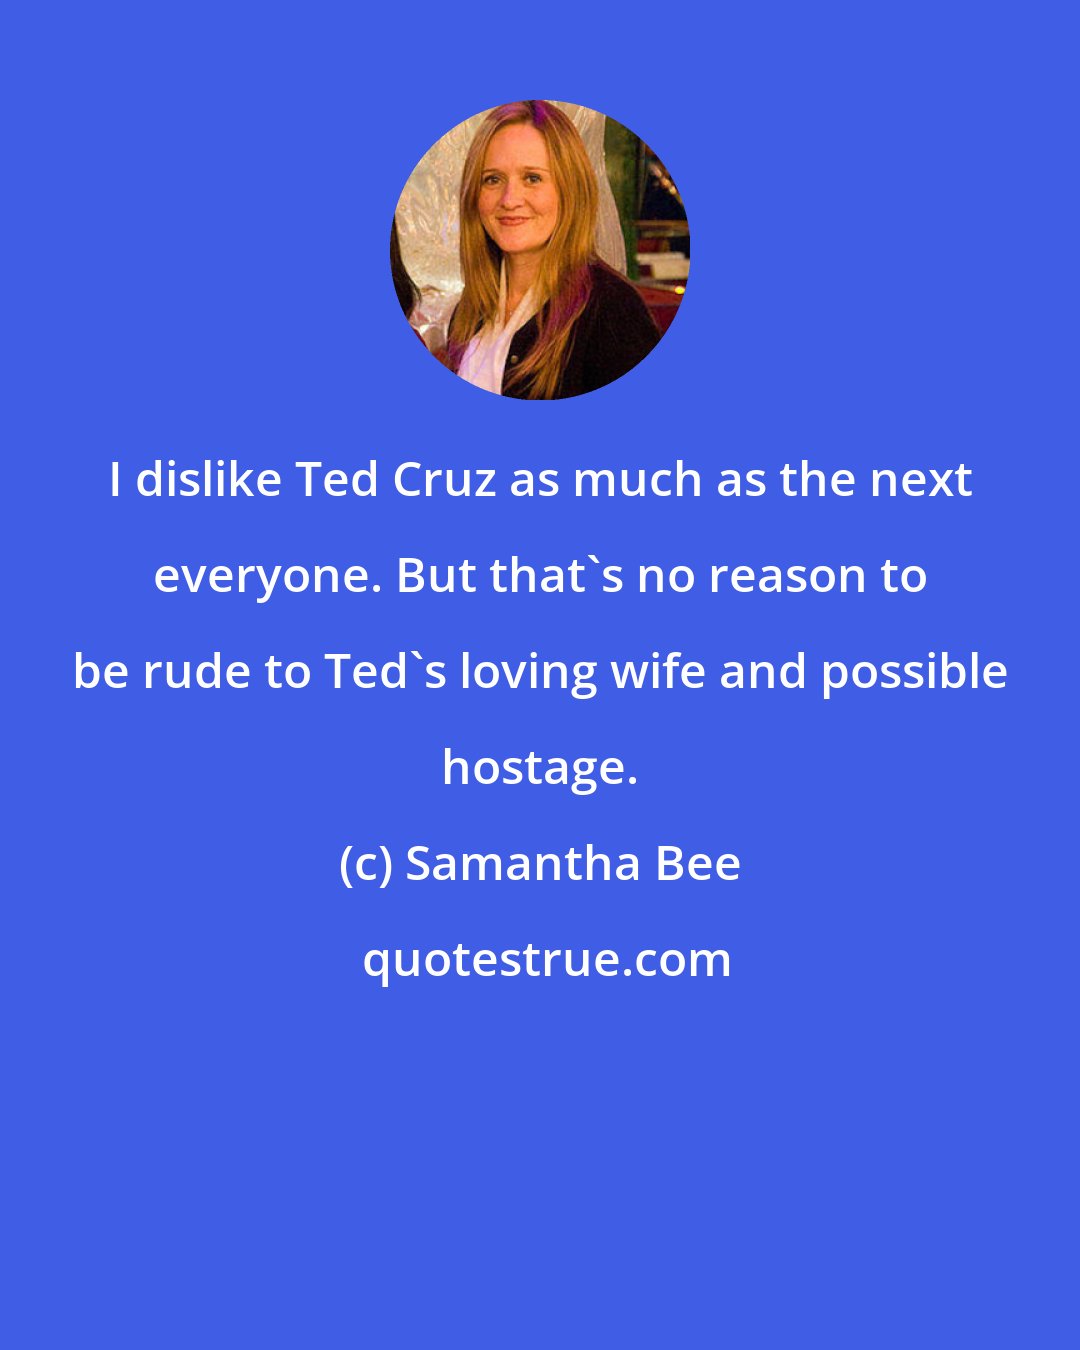 Samantha Bee: I dislike Ted Cruz as much as the next everyone. But that's no reason to be rude to Ted's loving wife and possible hostage.